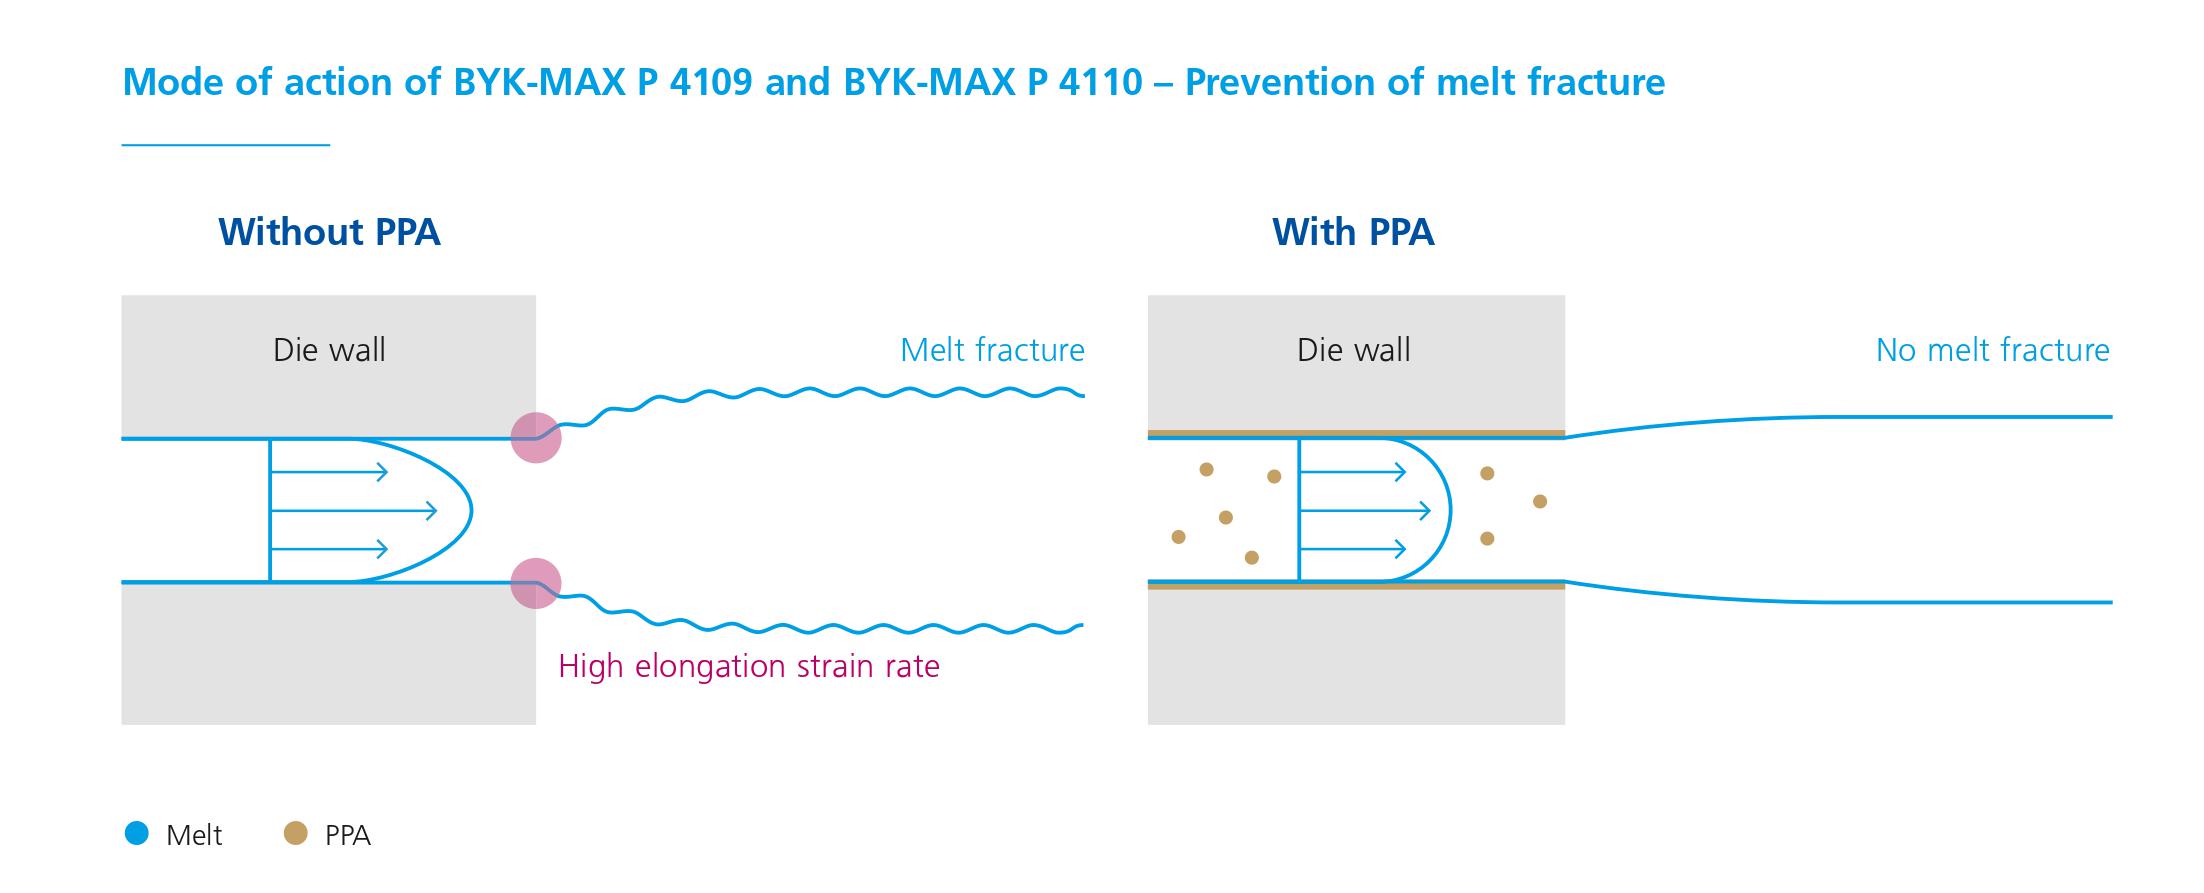 [Translate to Chinese:] Mode of action of BYK-MAX P 4109 and P 4110